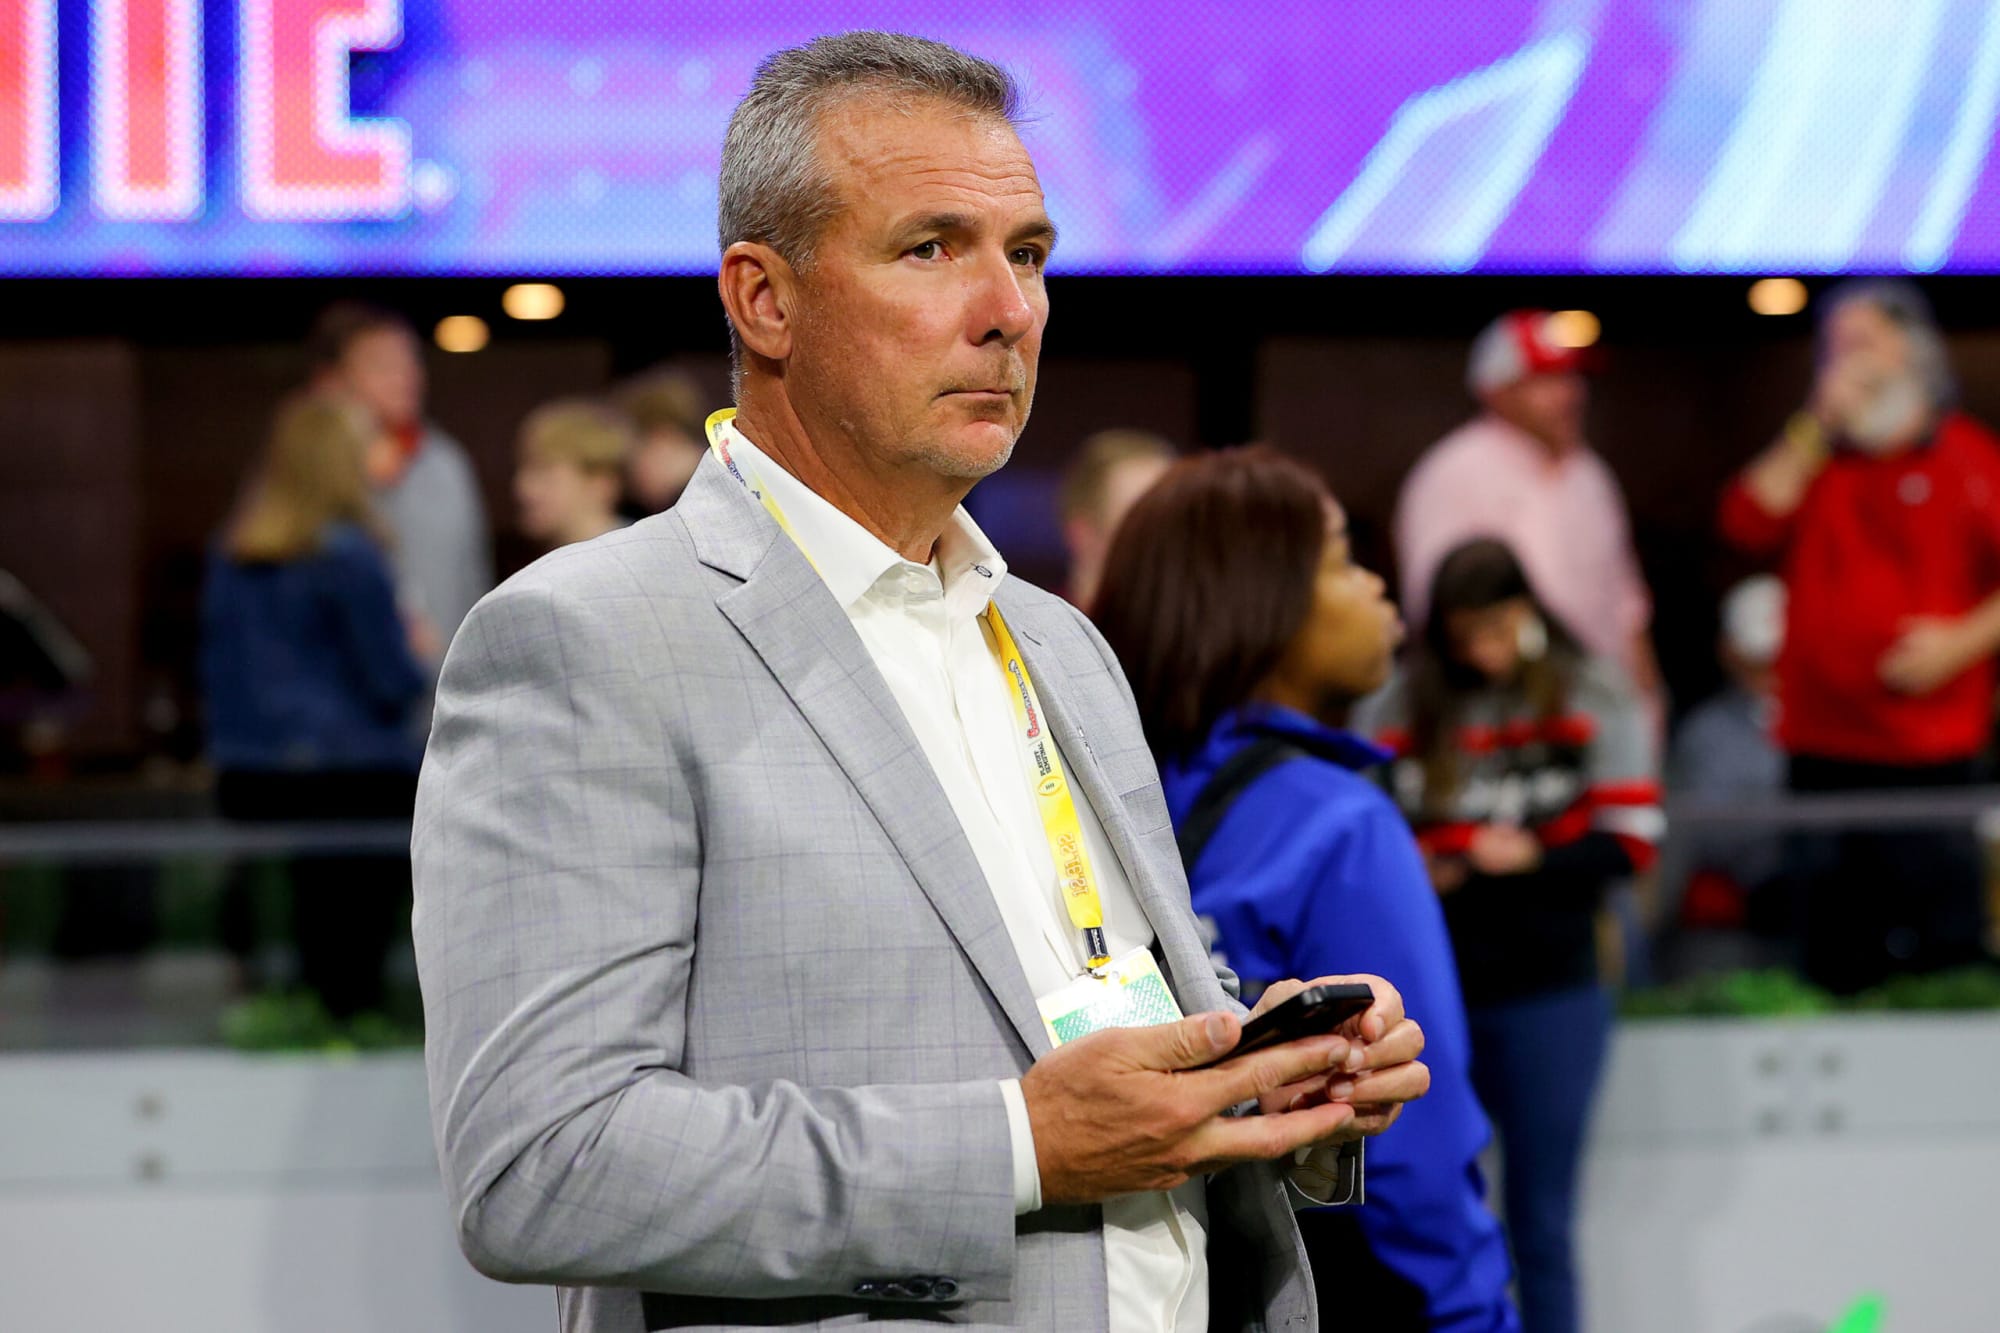 Urban Meyer accuses just about every college football program of ‘cheating’